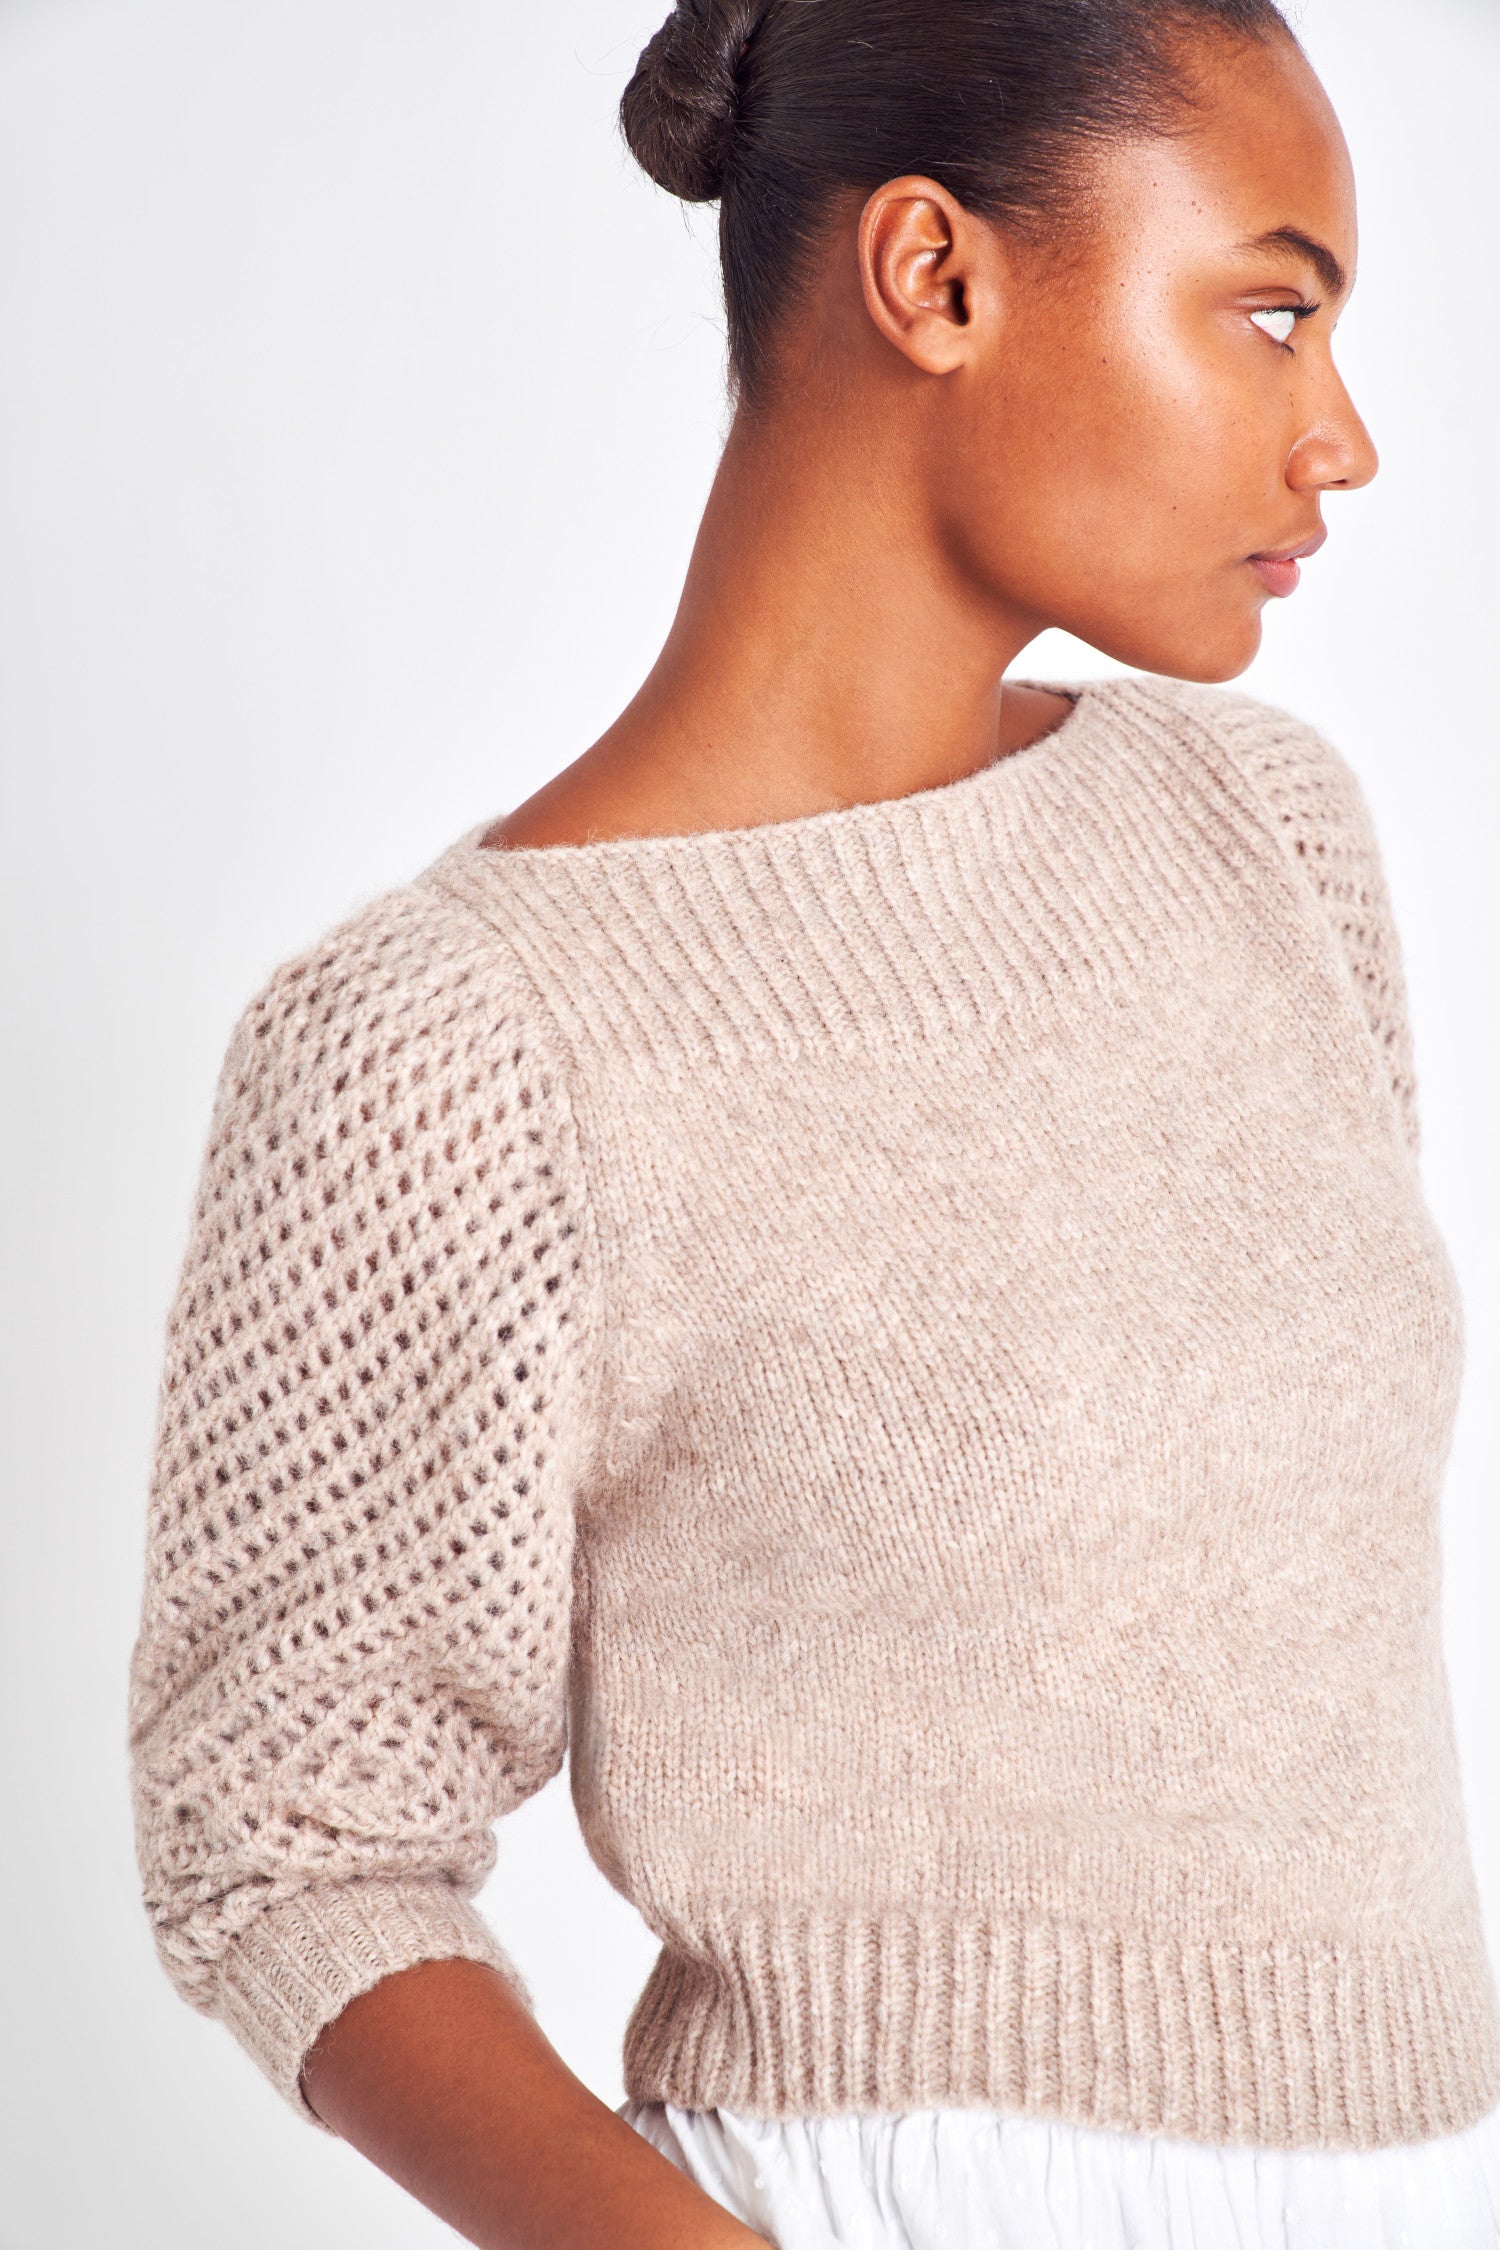 Women's Sweaters - Fashion Sweaters & Designer Pullovers